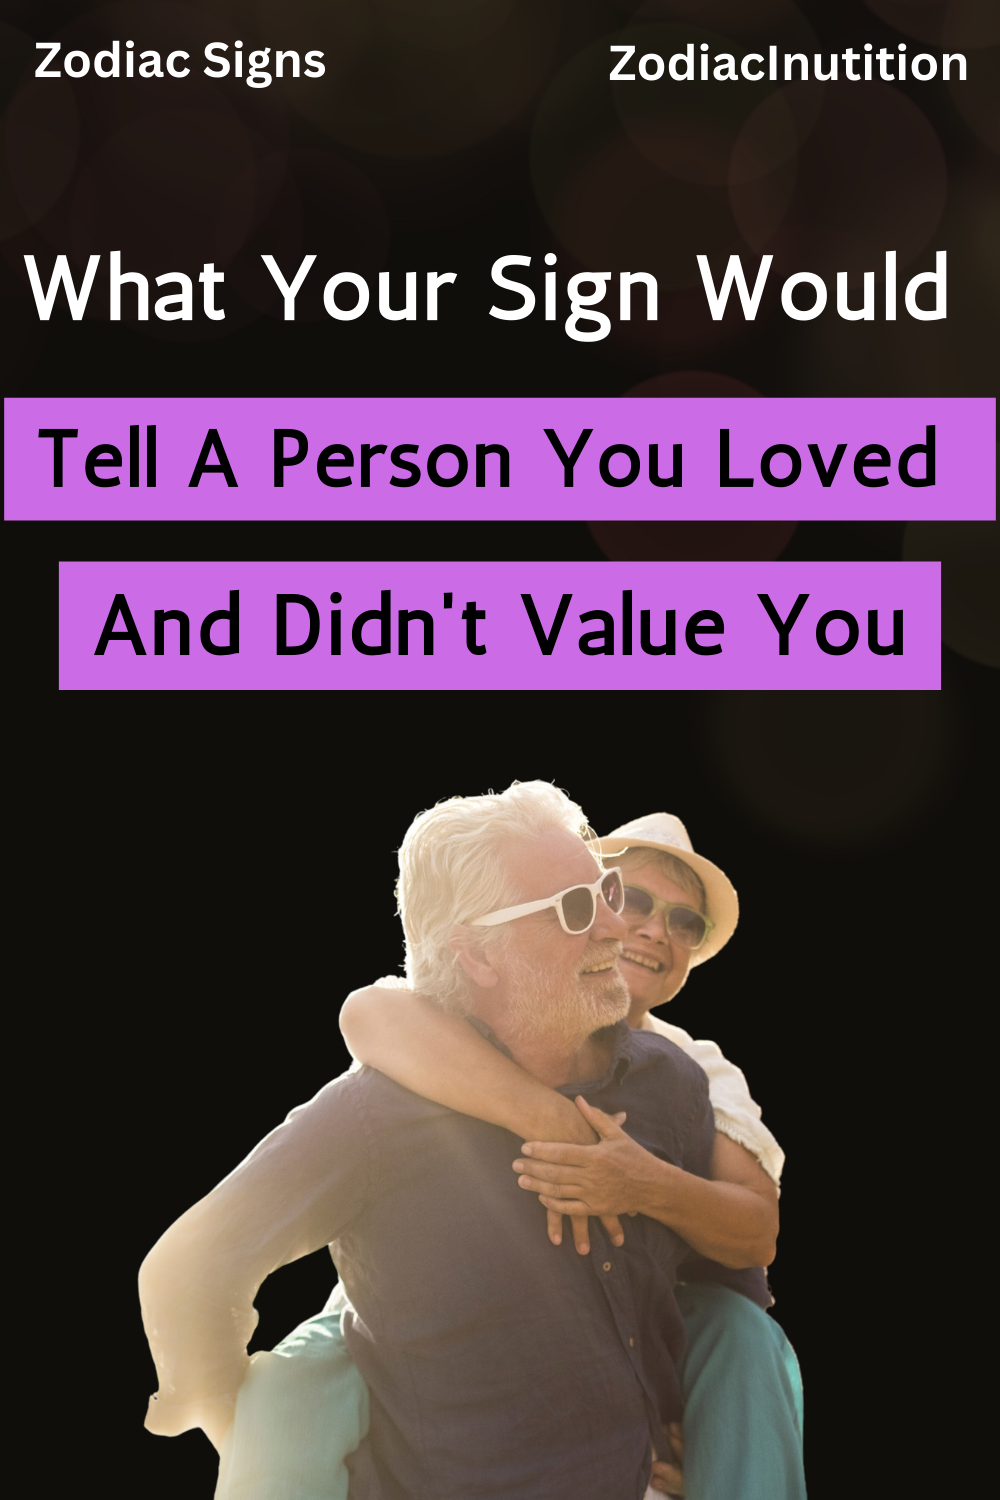 What Your Sign Would Tell A Person You Loved And Didn't Value You